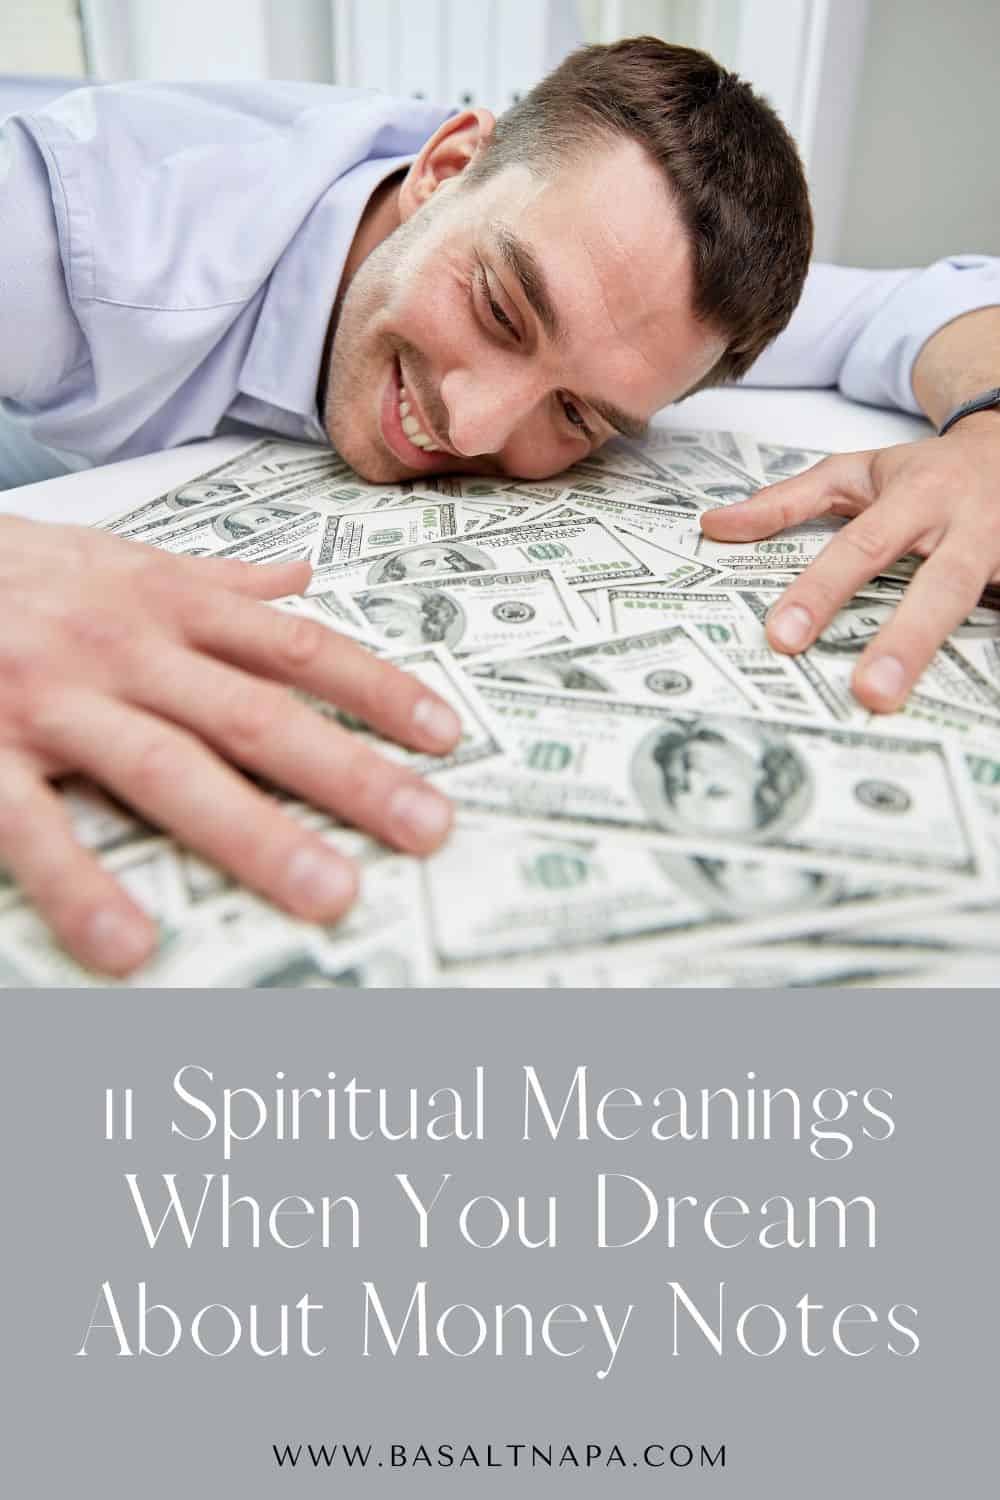 11 Spiritual Meanings When You Dream About Money Notes